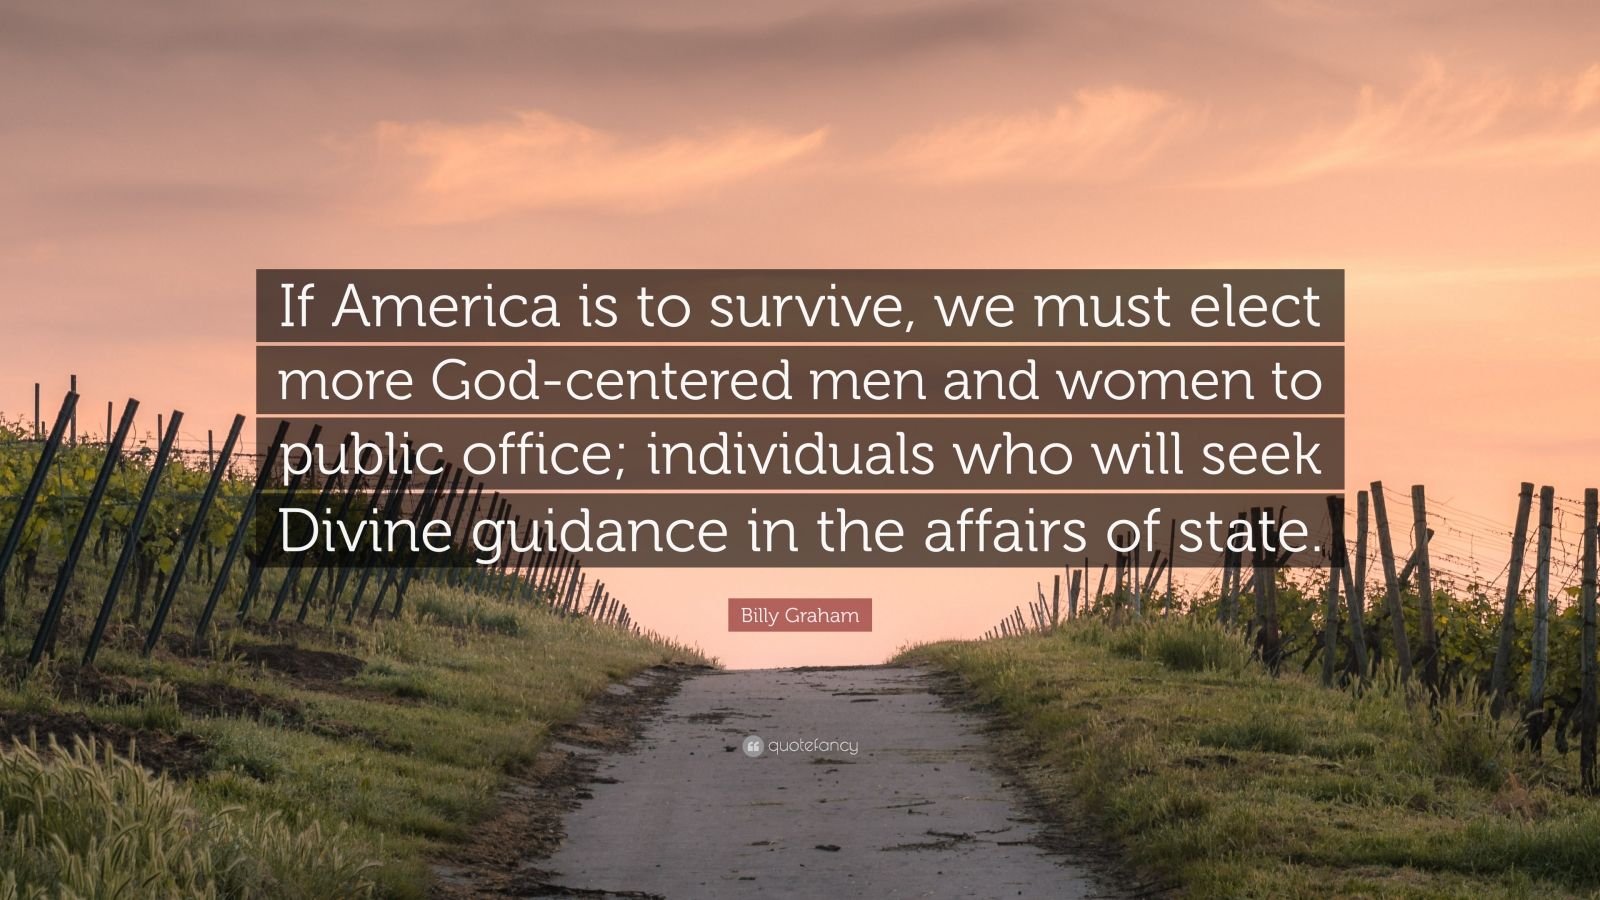 Billy Graham Quote “If America is to survive, we must